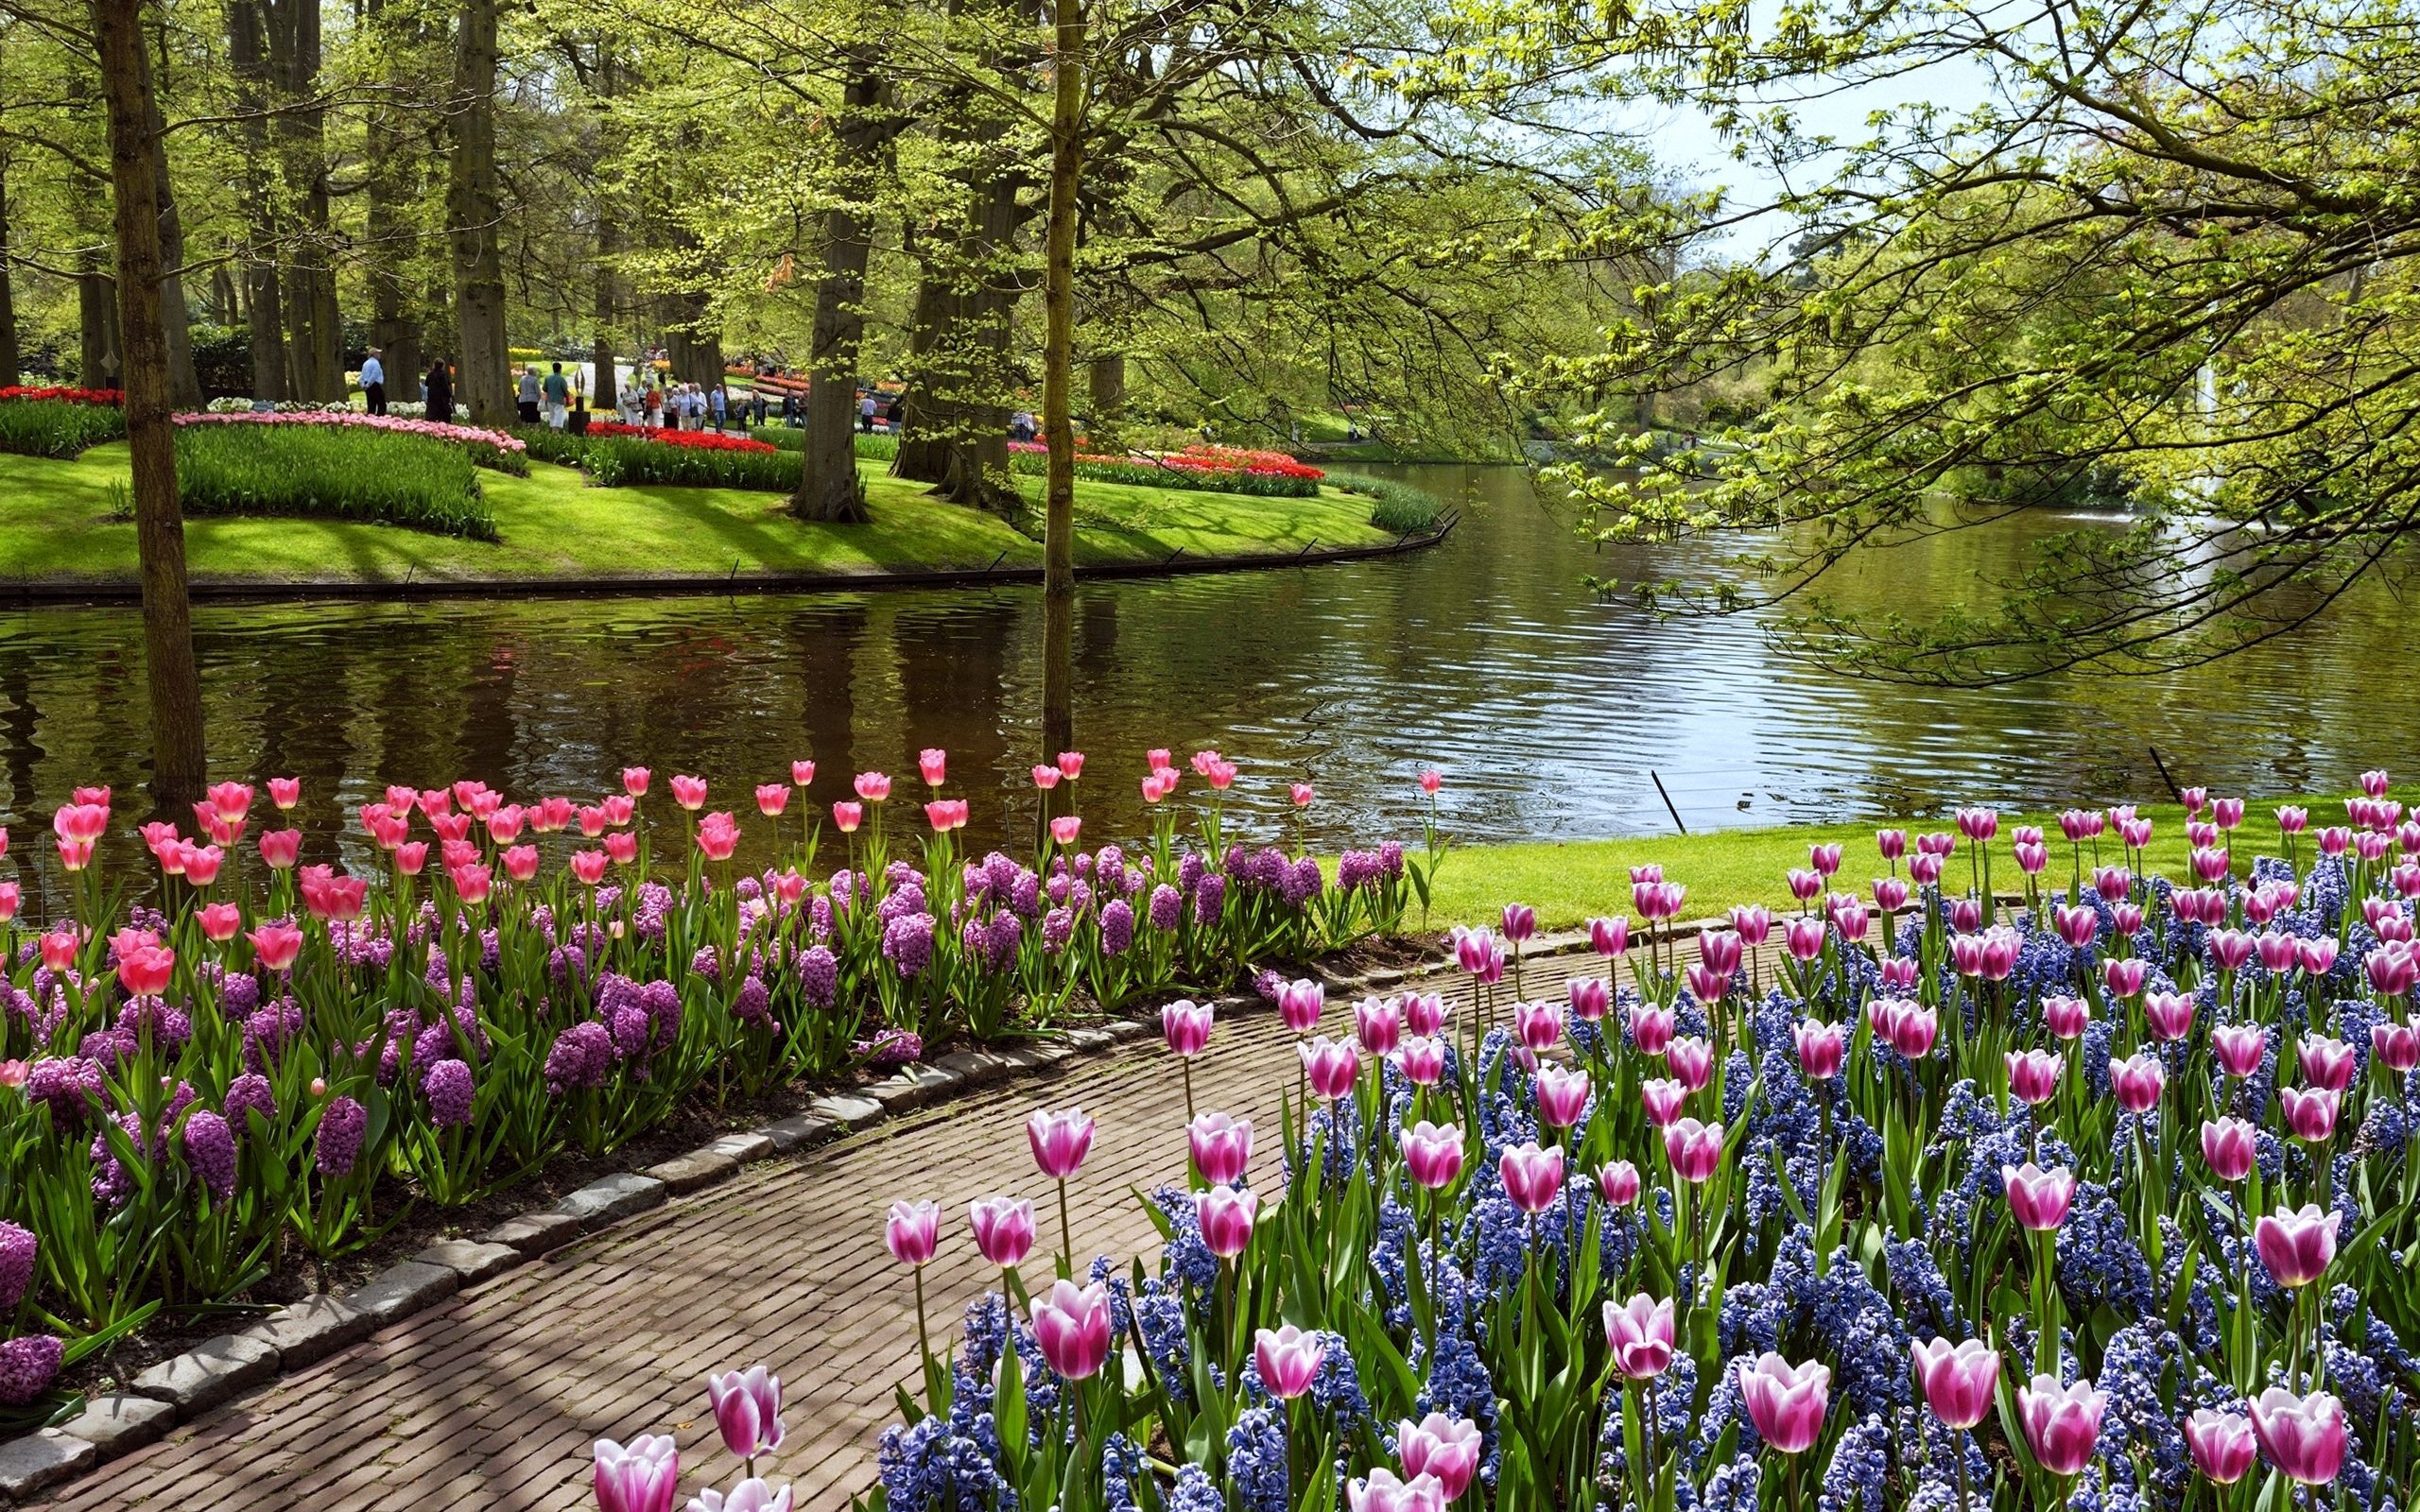 This Flower Filled Park In Keukenhof, Netherlands Is The Perfect Way To Spring Into A New Seaso. Beautiful Summer Wallpaper, Summer Garden, Summer Beach Wallpaper